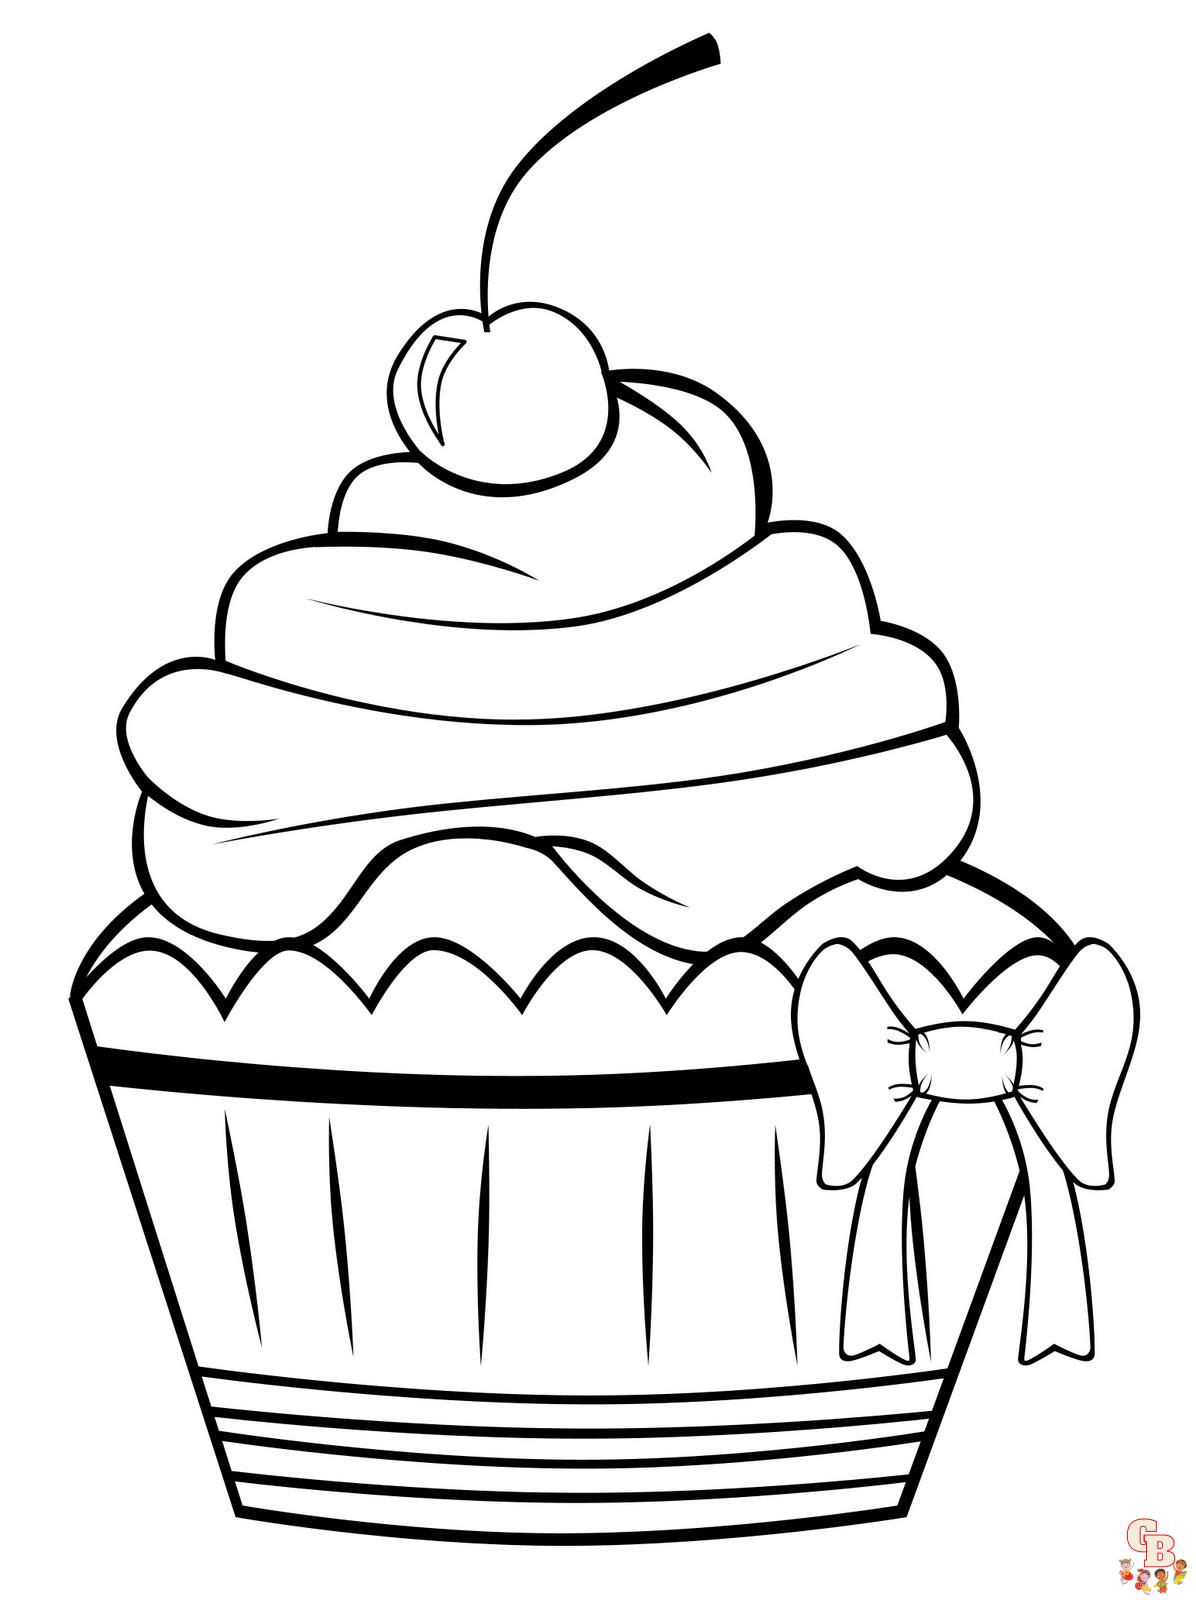 Cupcakes coloring pages